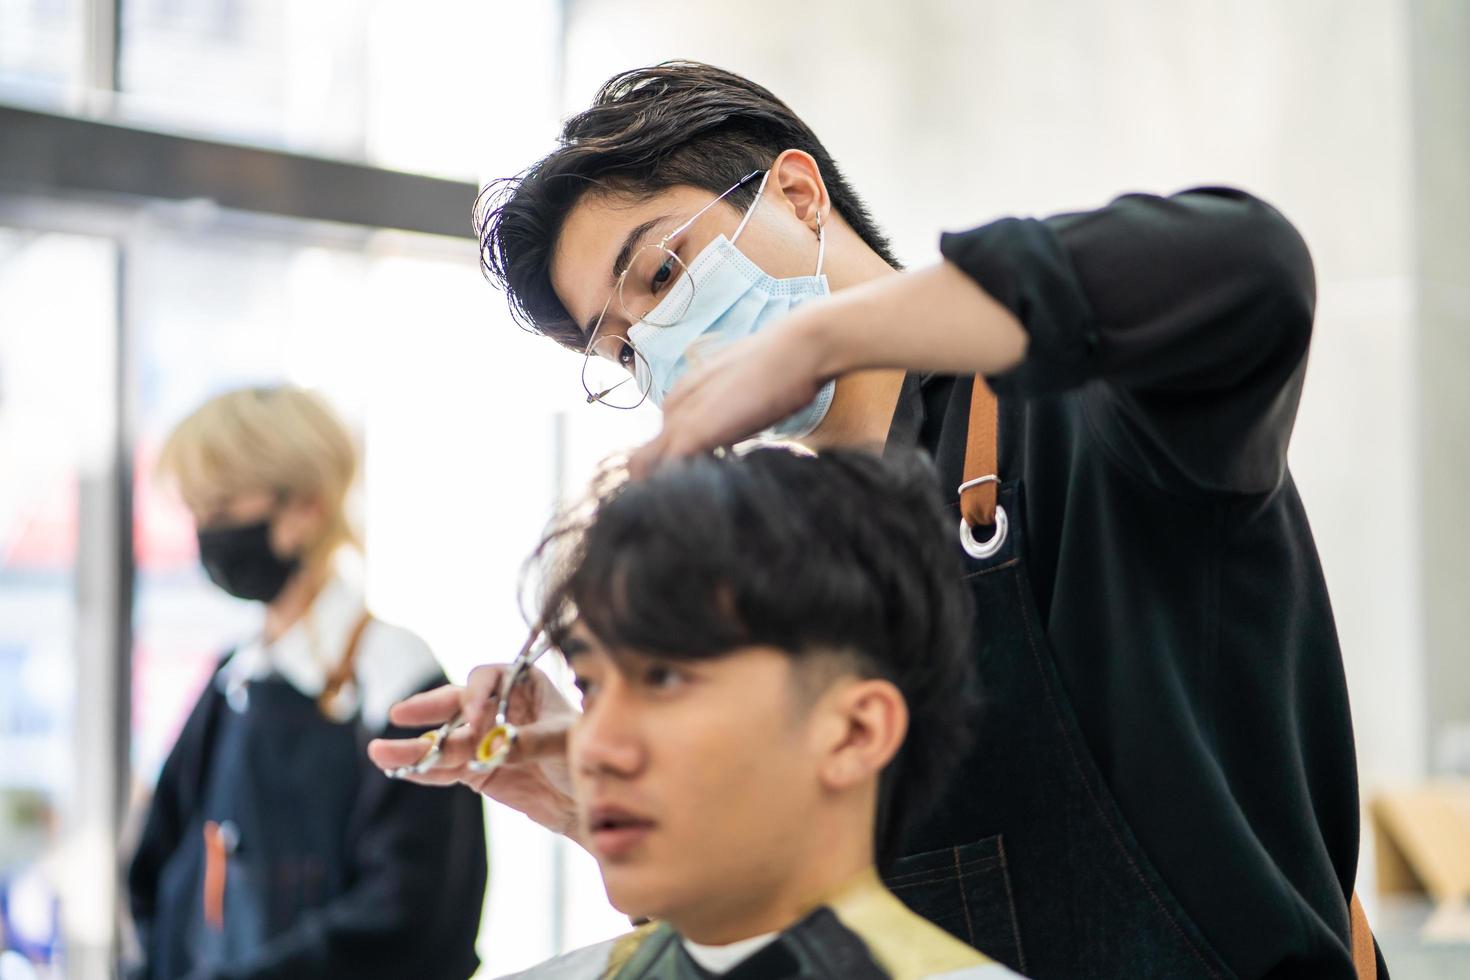 Asian men Hair stylish with customer while do hair cut and wearing surgical face mask while styling hair for client. Professional occupation, beauty and fashion service new normal photo